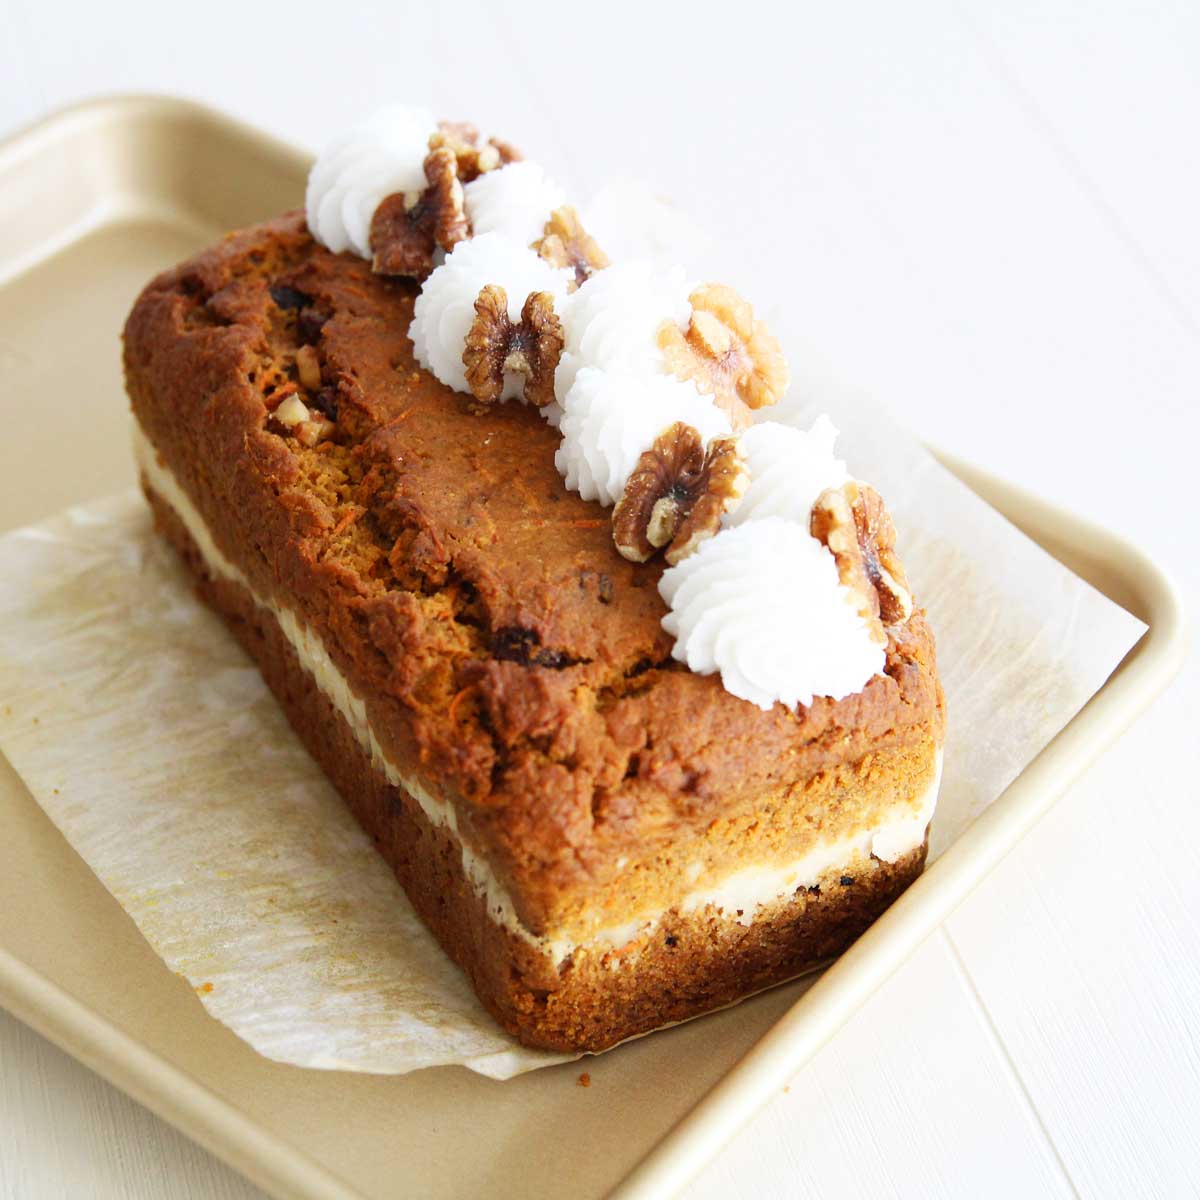 Ultimate List of Pumpkin Bread Ideas - Part 2: Icing, Frosting & Topping Variations - Flourless Pumpkin Roll Cake